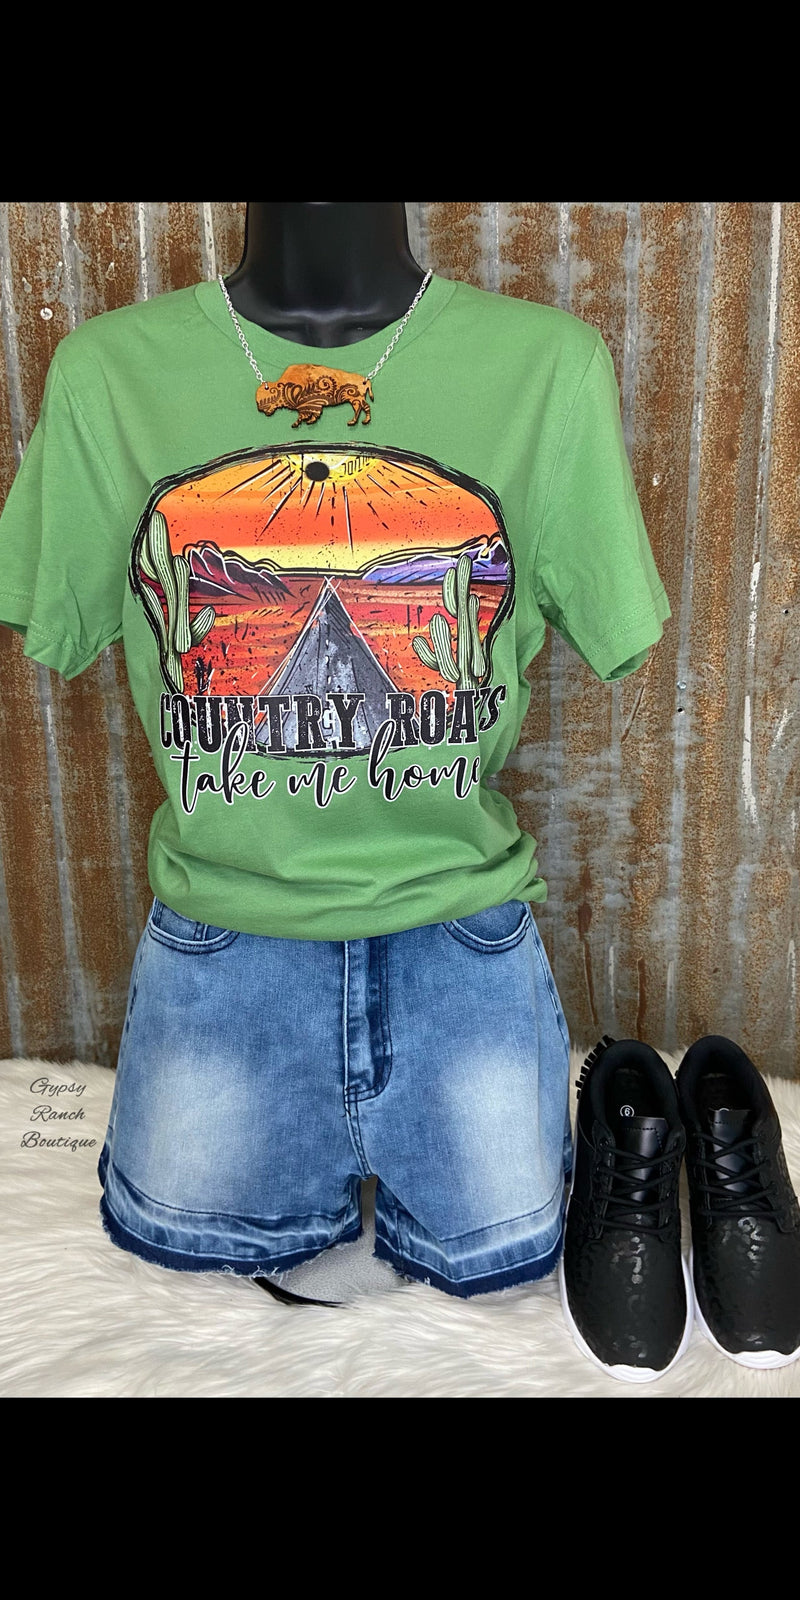 Country Roads Take Me Home Top - Also in Plus Size